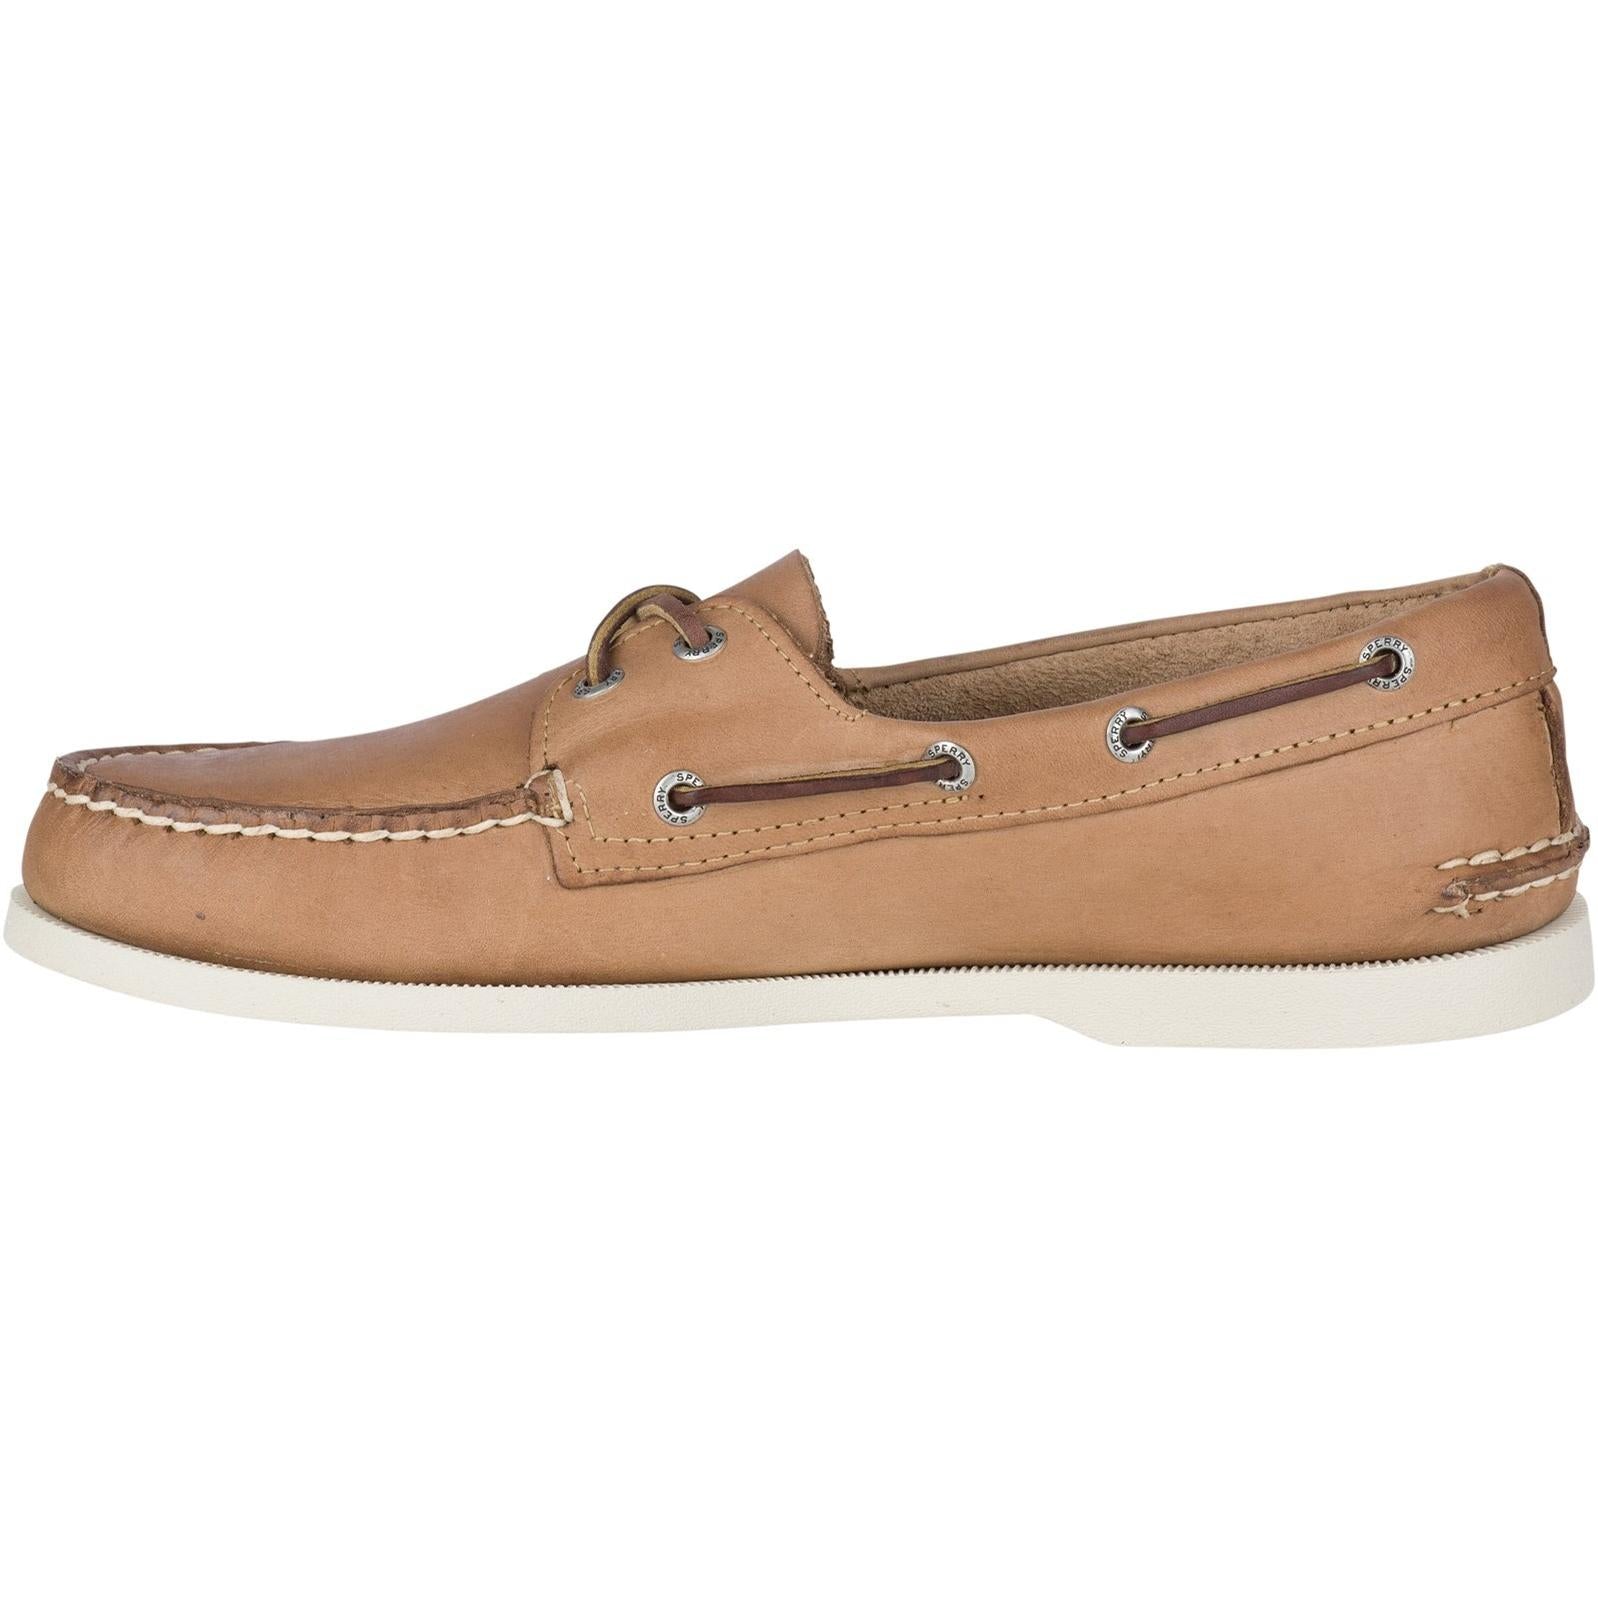 Sperry Top-sider Authentic Original Leather Boat Shoe